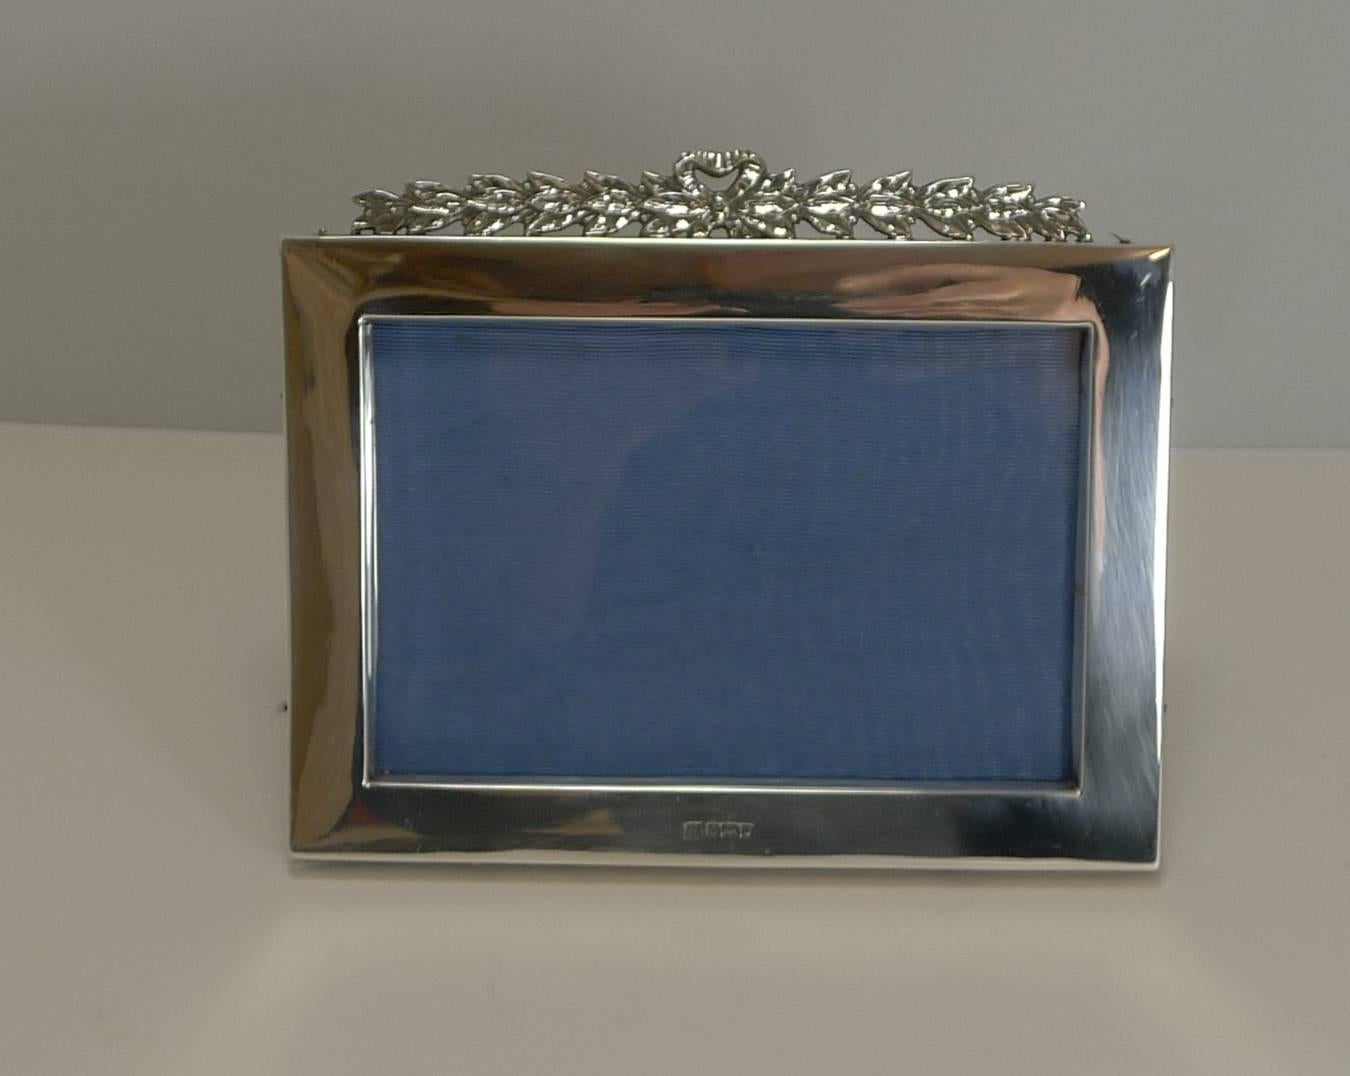 A stunning English Edwardian photograph frame made from sterling silver, with a popular and harder to find landscape configuration.

The top is beautifully crowned with an elongated ribbon and bow mount.

The silver is fully hallmarked for the